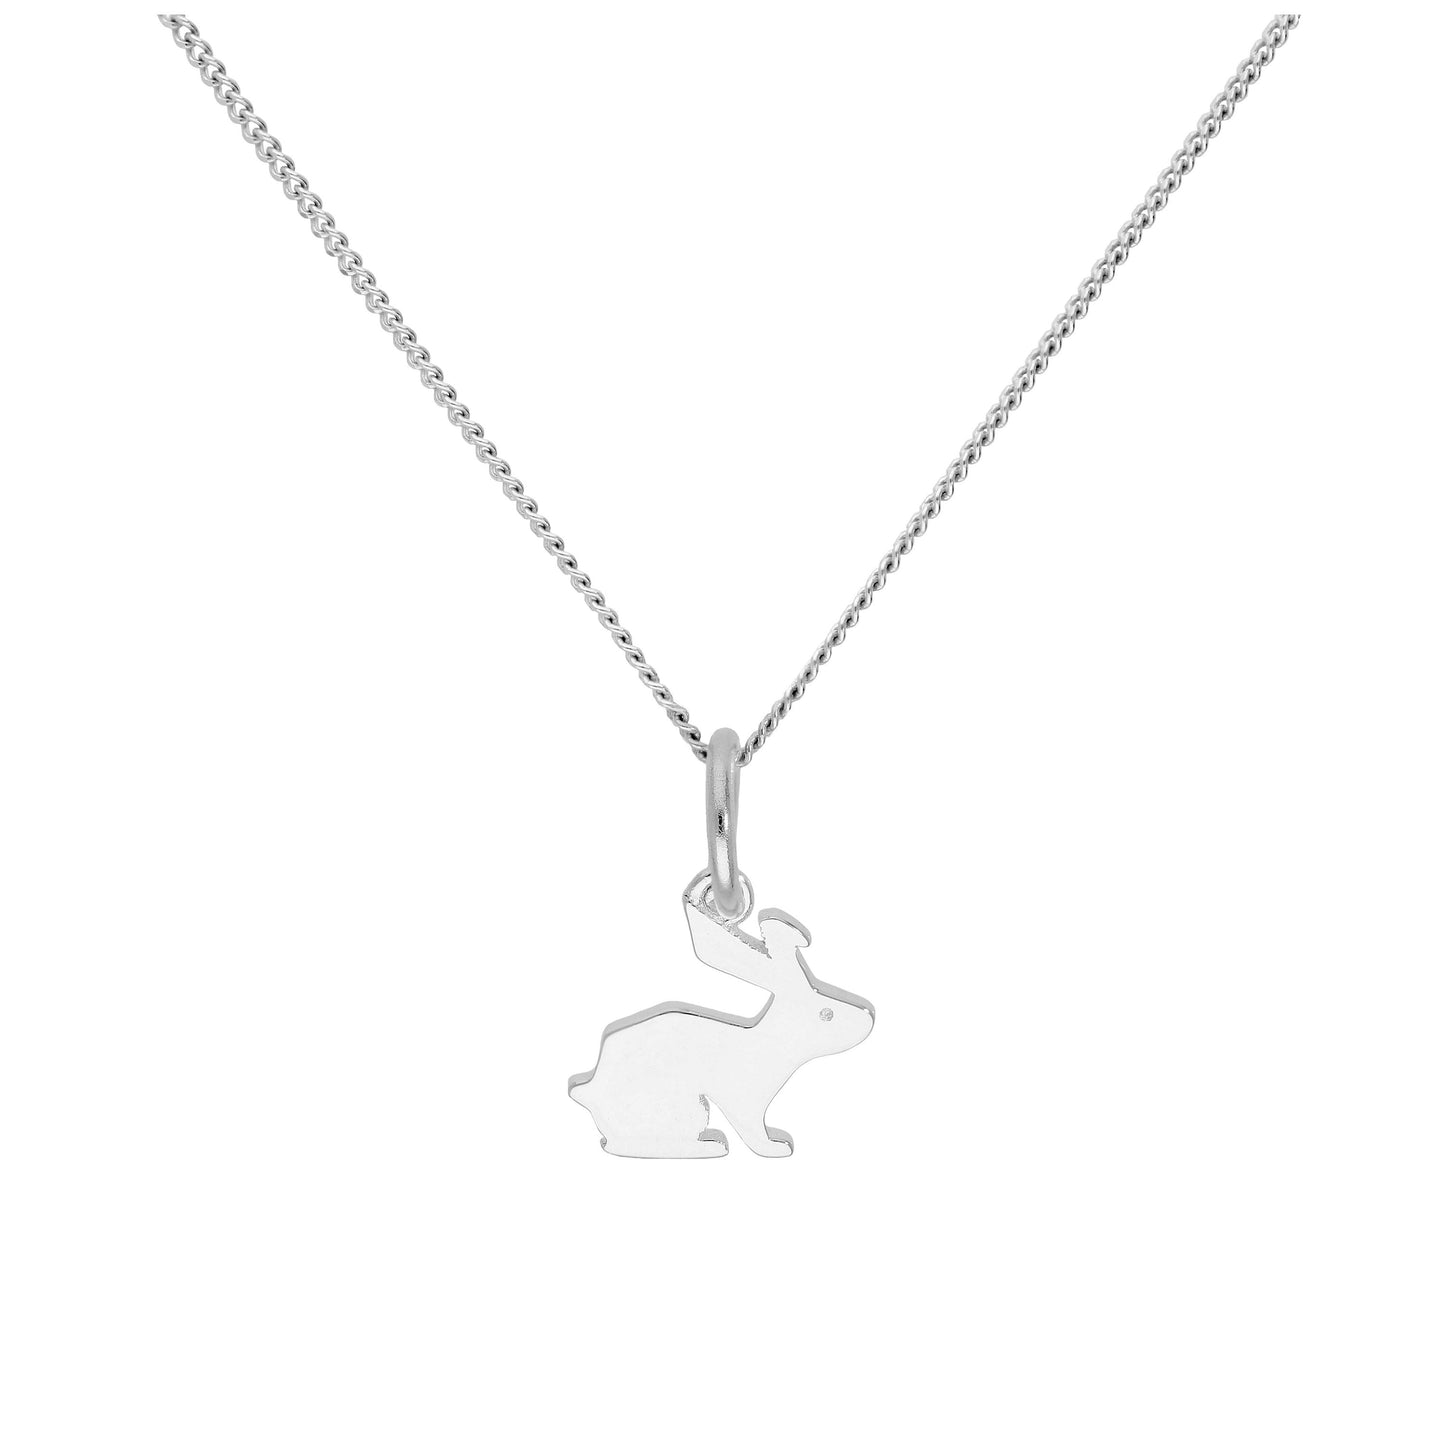 Sterling Silver Hare Pendant on 16+2 Inches Diamond Cut Chain